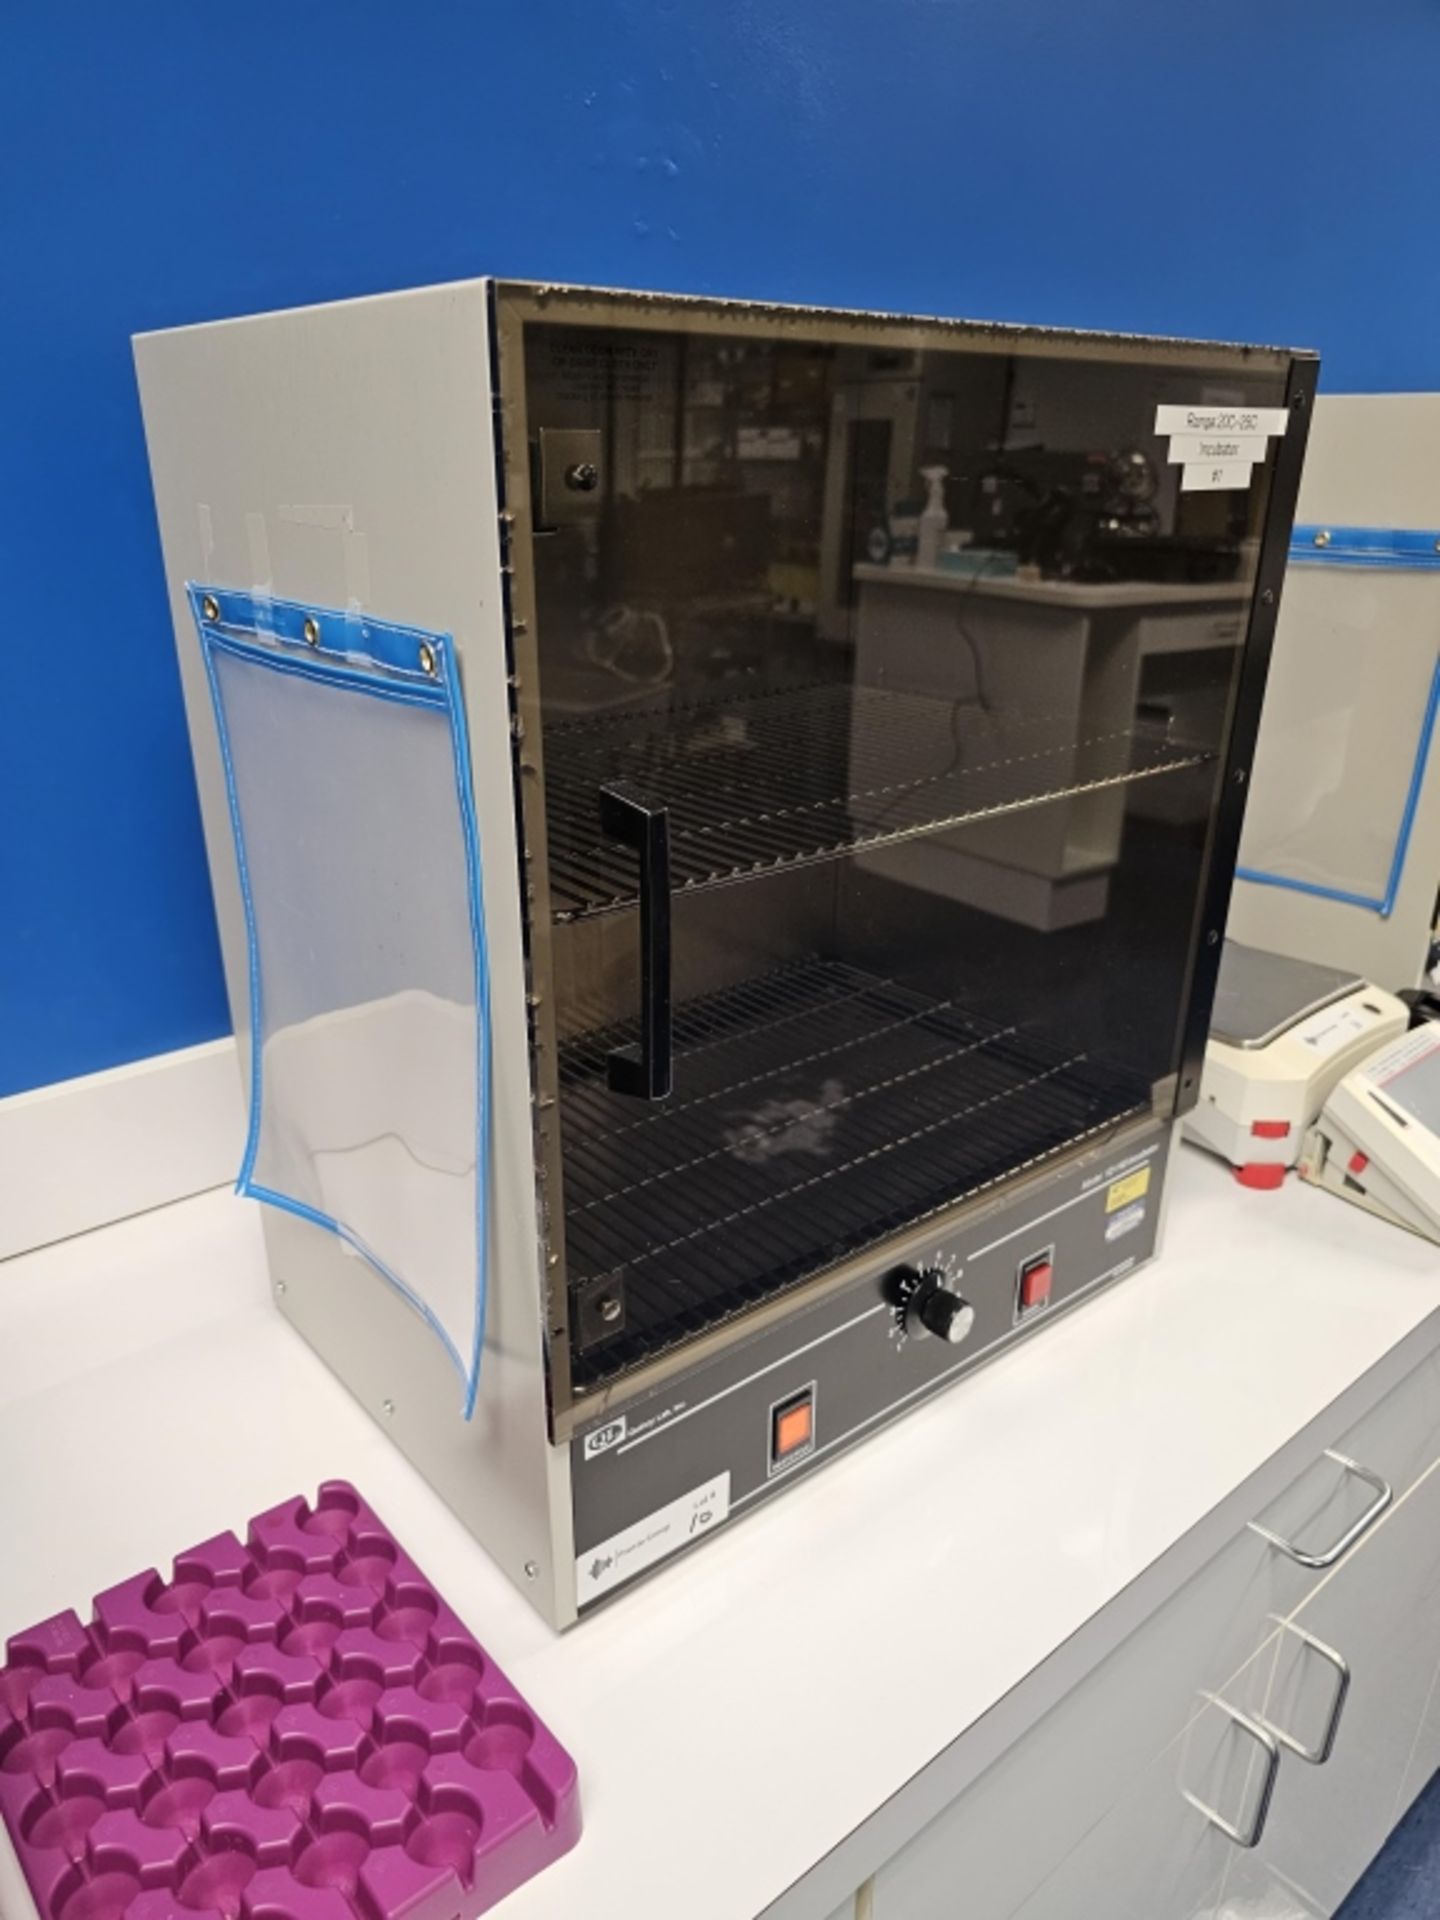 Quincy Lab 140 Series Model 12-140 Incubator sn T-07714 - Image 5 of 6